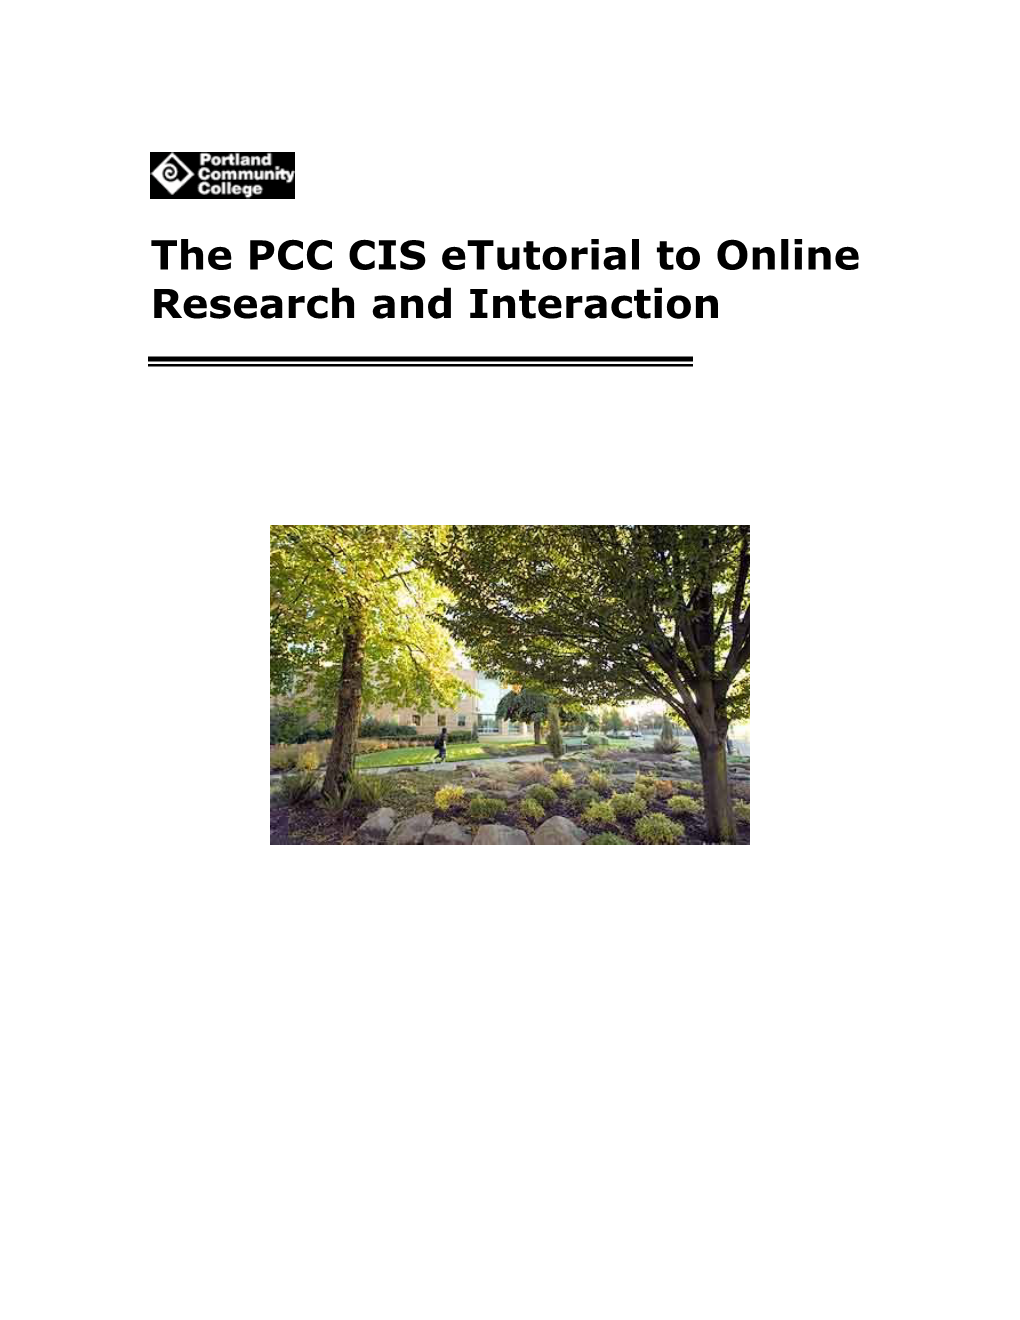 Etutorial to Online Research and Interaction